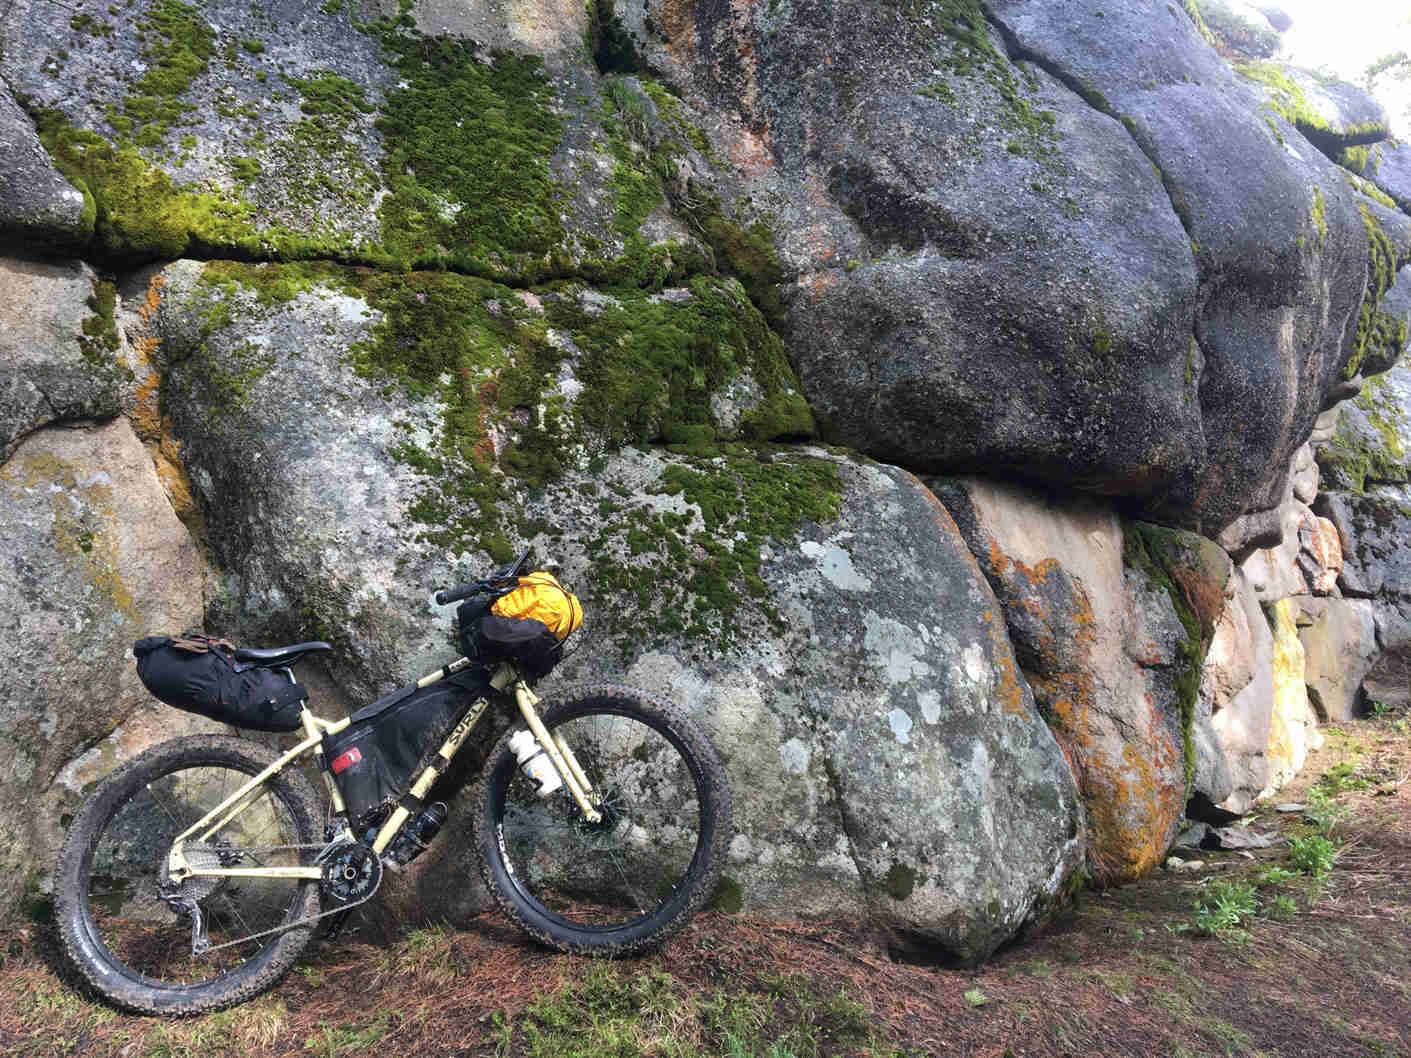 Right side view of a Surly ECR bike, loaded with gear, against a rock wall